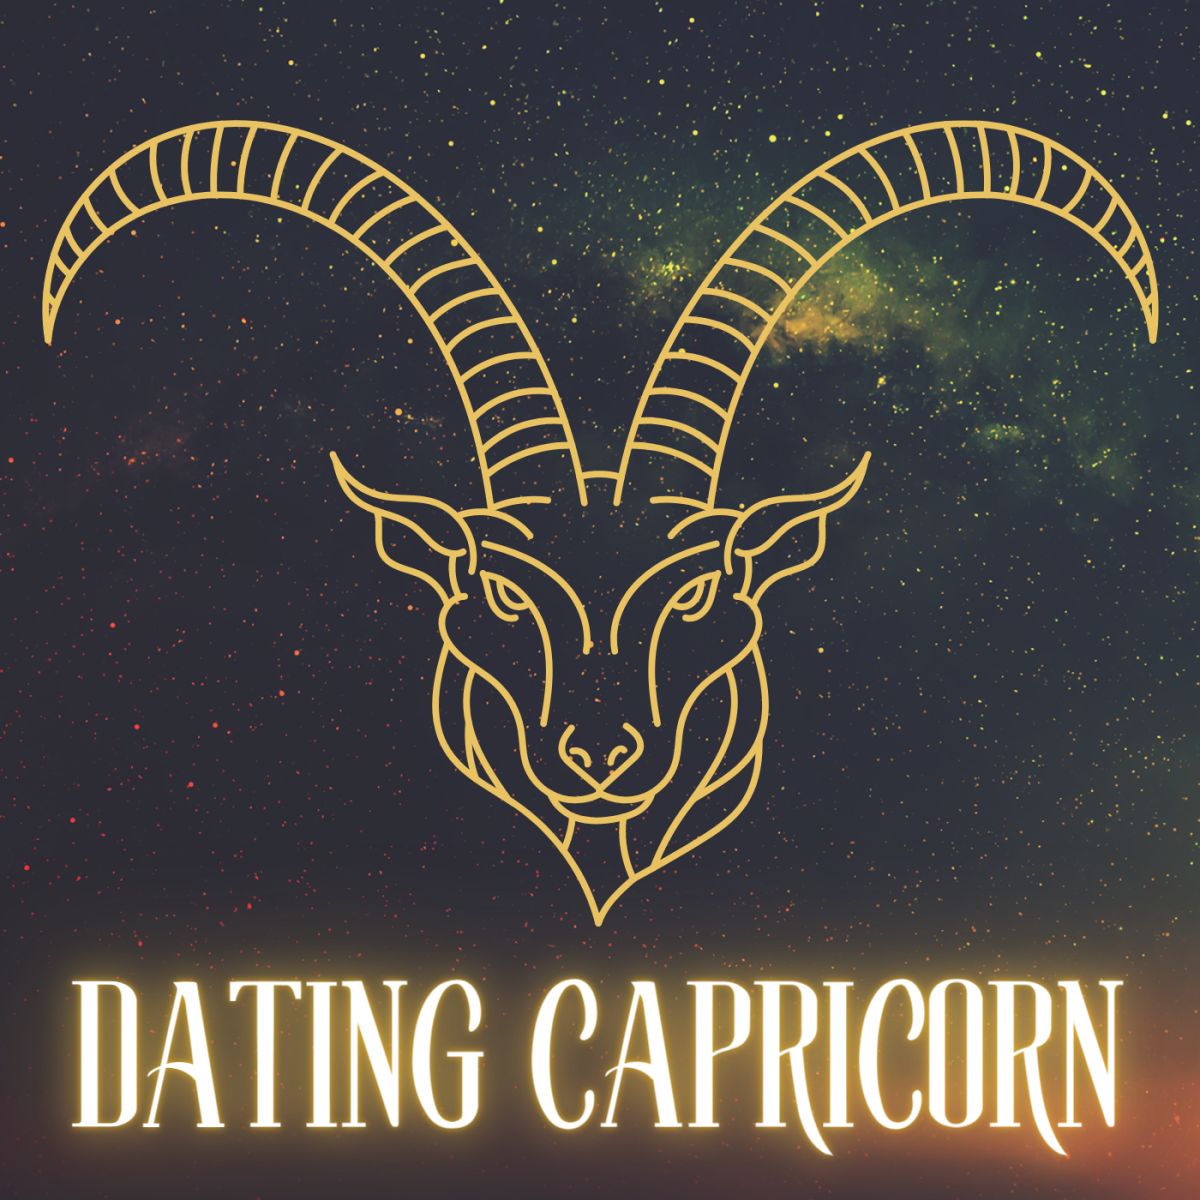 It's hard to win a Capricorn's heart. Explore this sign's personality and dating style.